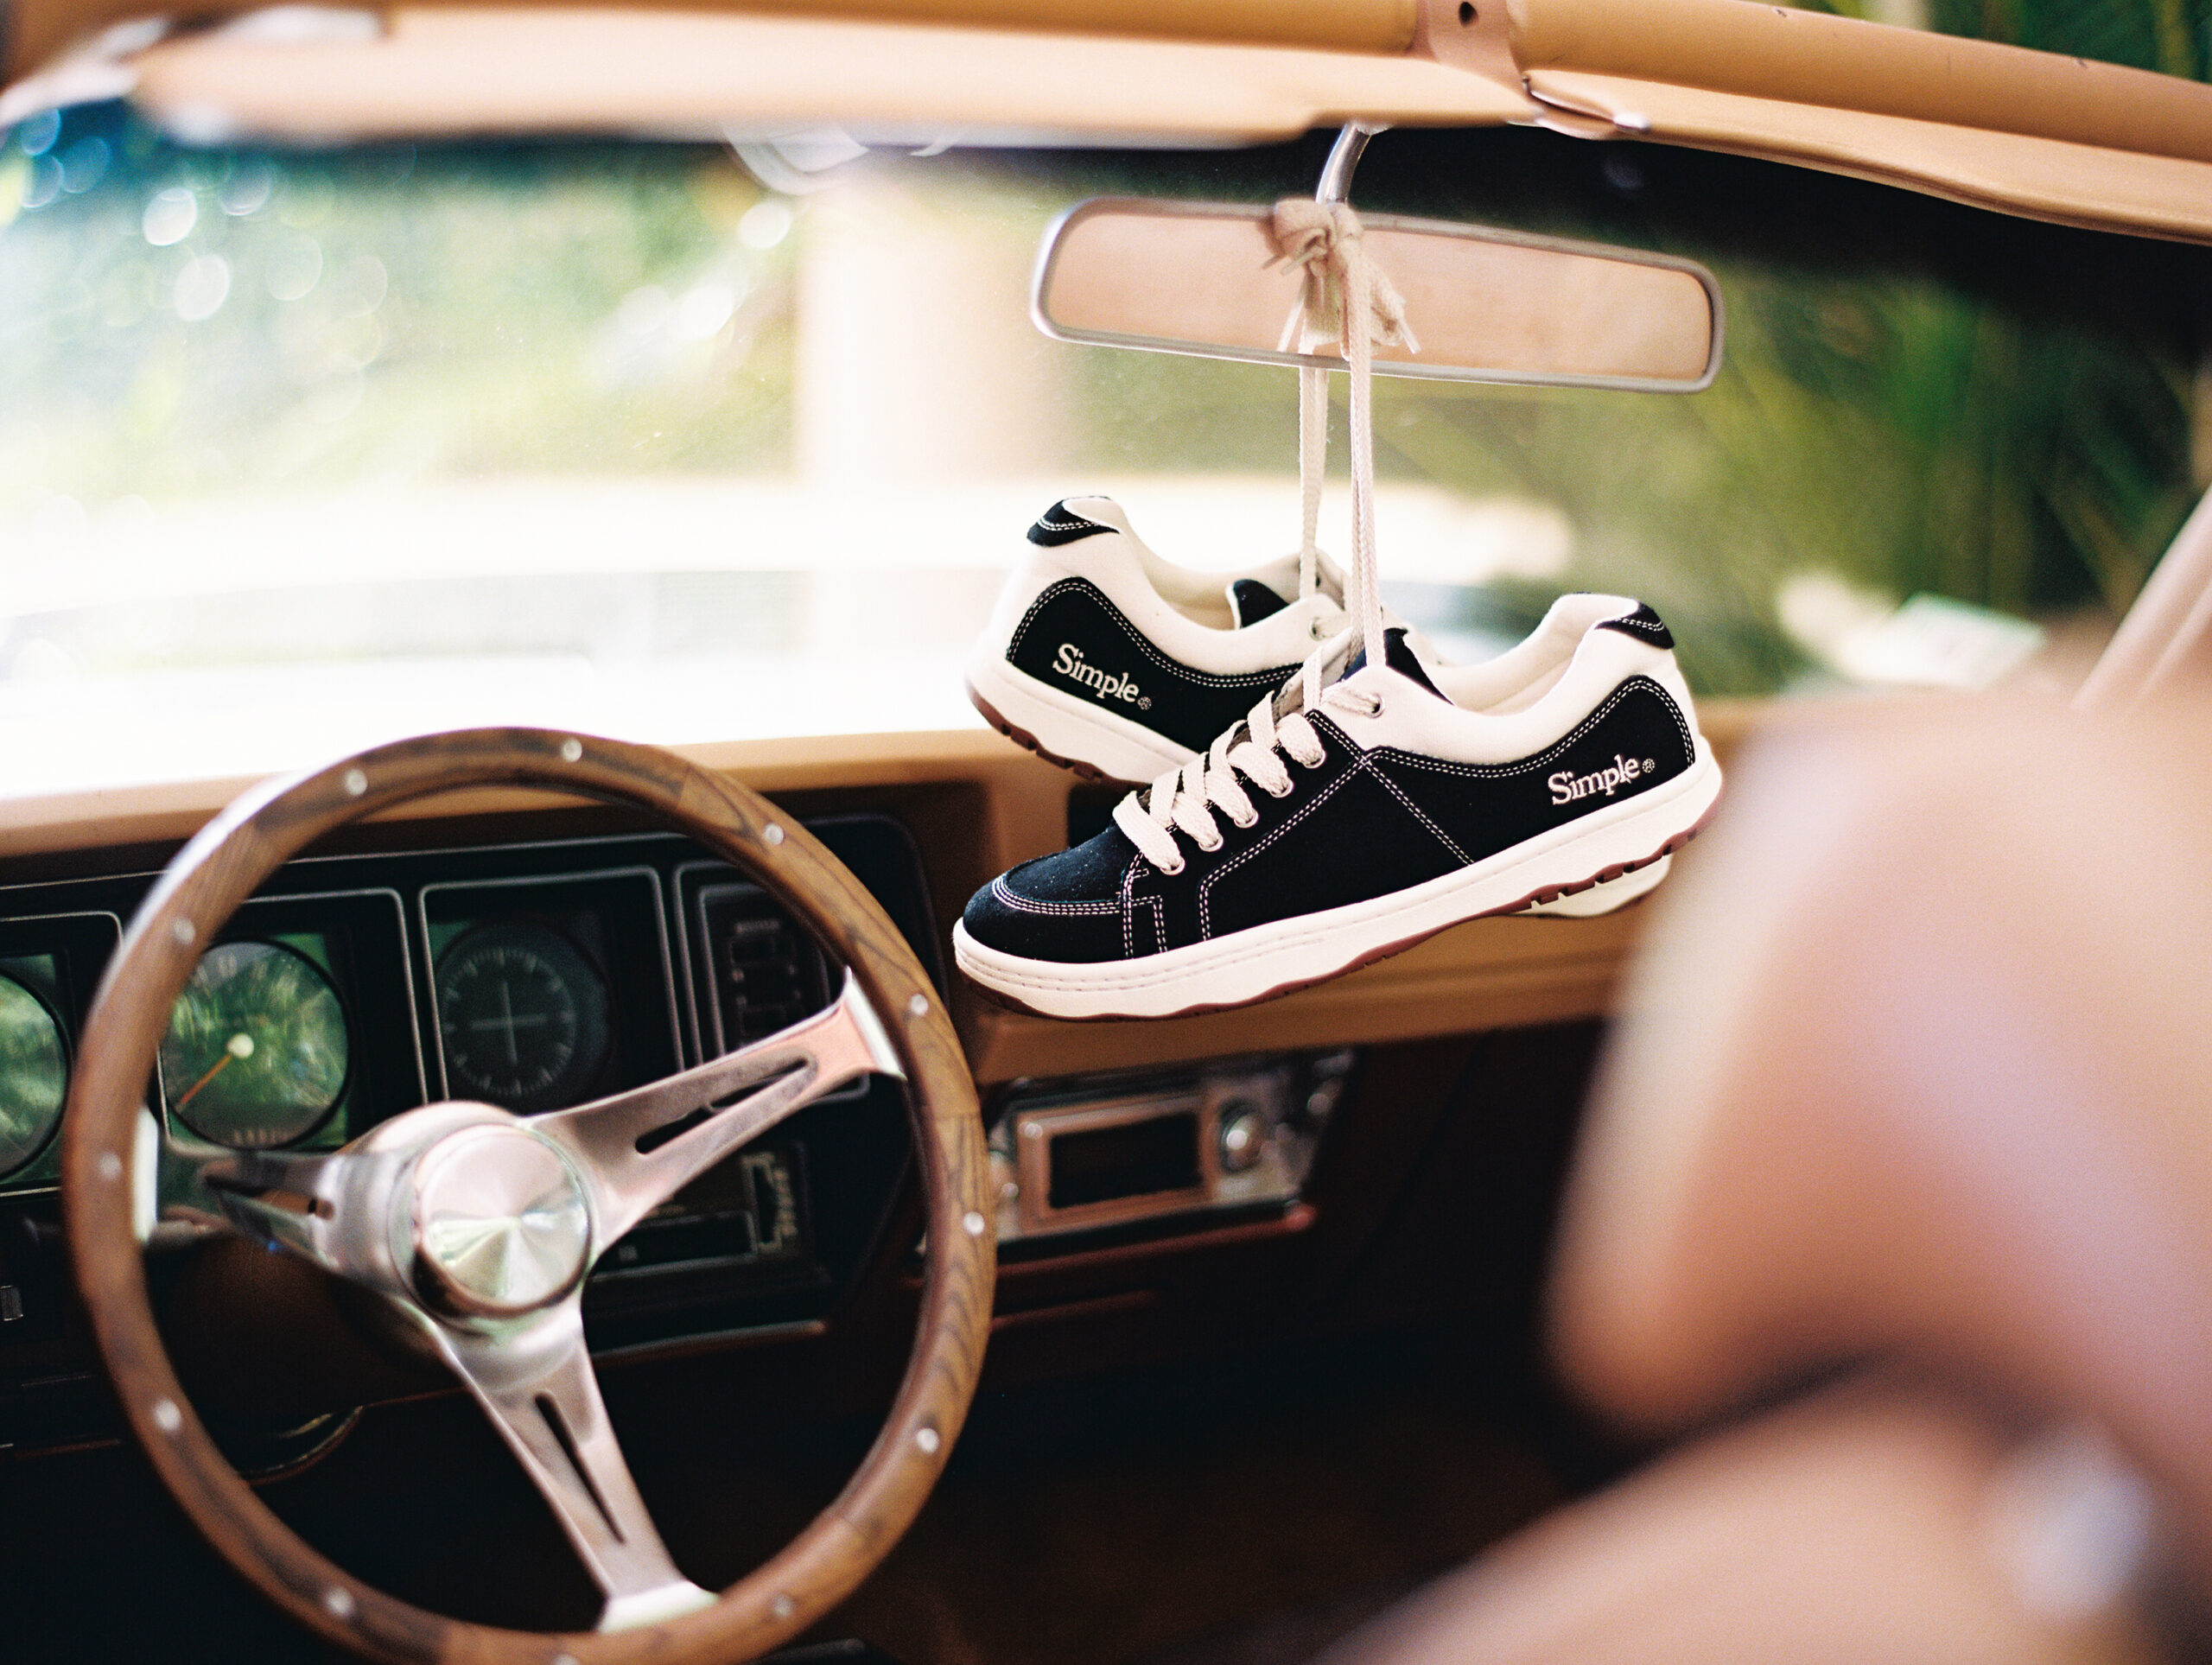 Shoes hanging in classic car mirror shot on film